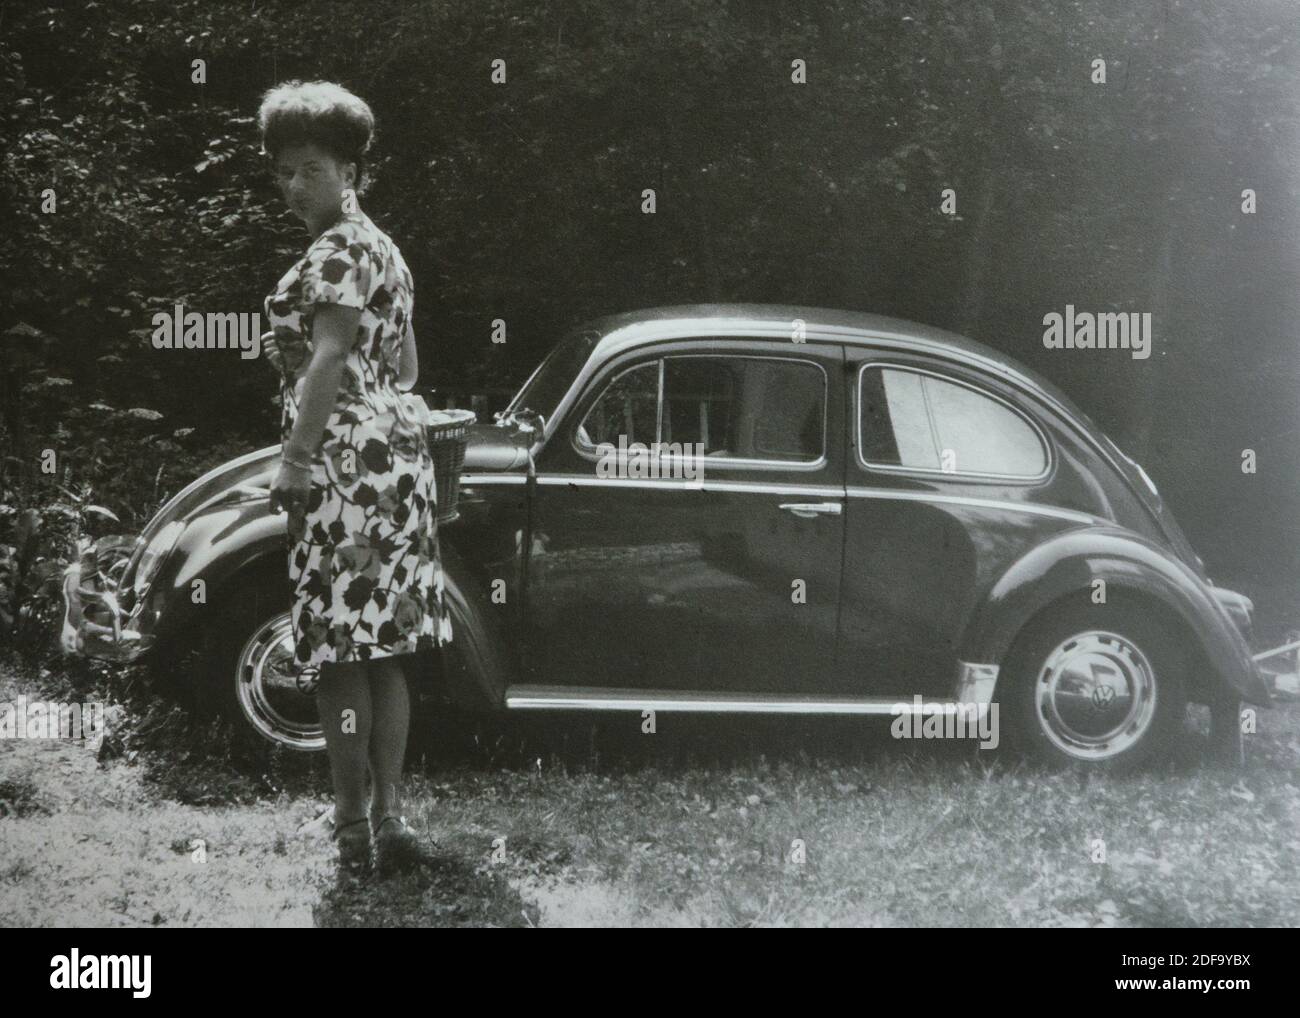 Historical Photo:  A woman with a VW Kaefer car  1964 in Biessenhofen, Bavaria, Germany. Reproduction in Marktoberdorf, Germany, October 26, 2020.  © Peter Schatz / Alamy Stock Photos Stock Photo